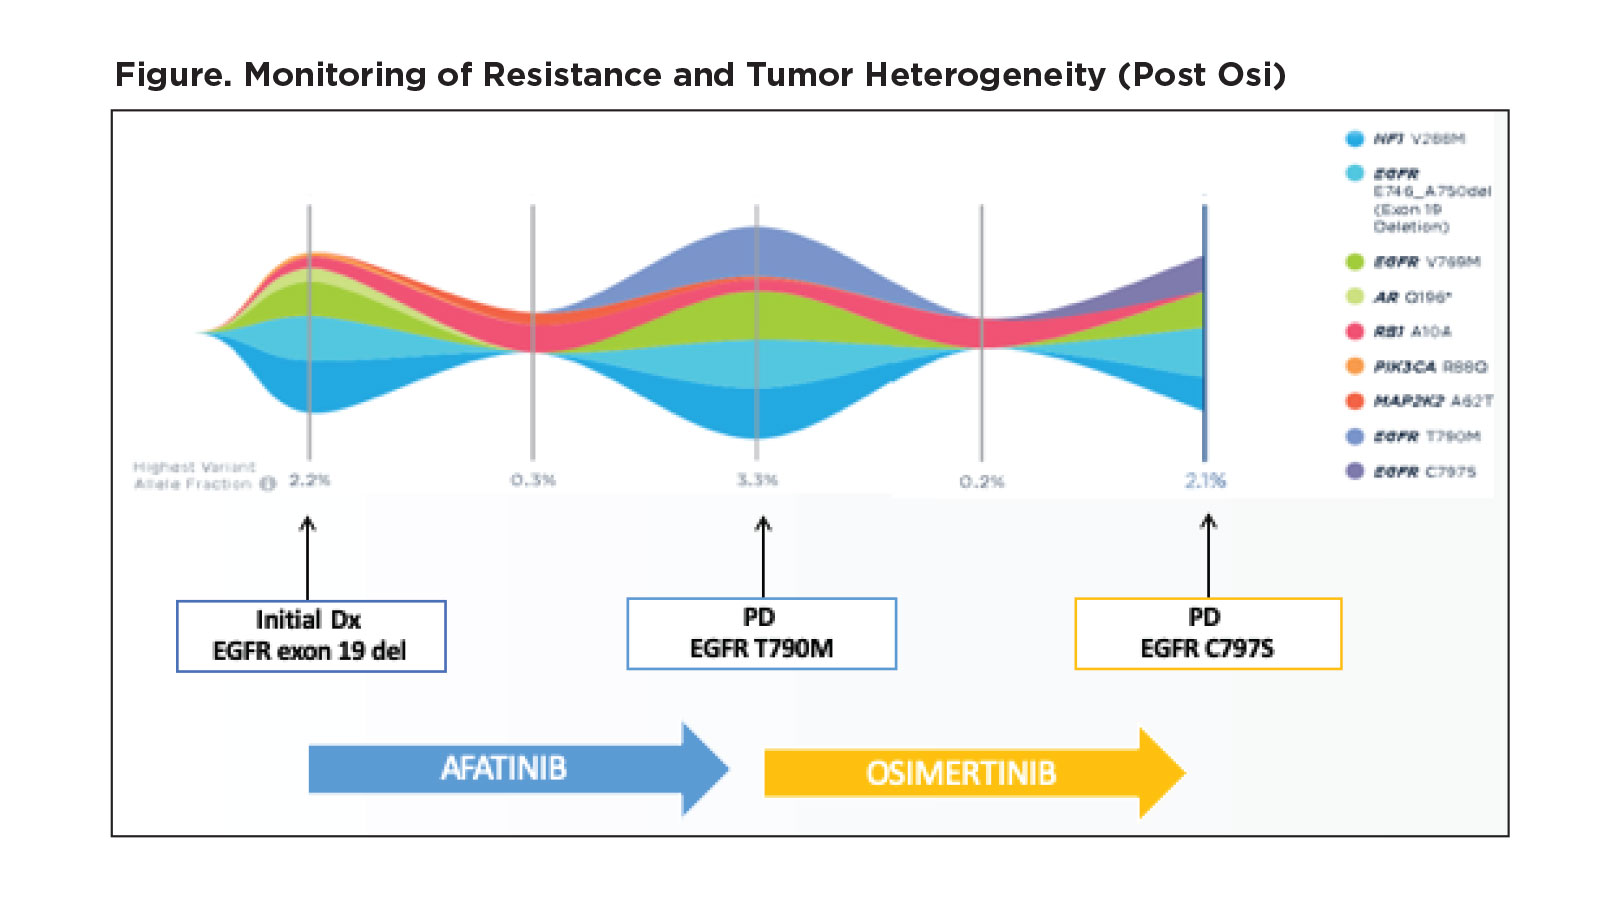 ctDNA Offers a Window Into Emerging Mechanisms of Resistance to Targeted Therapy